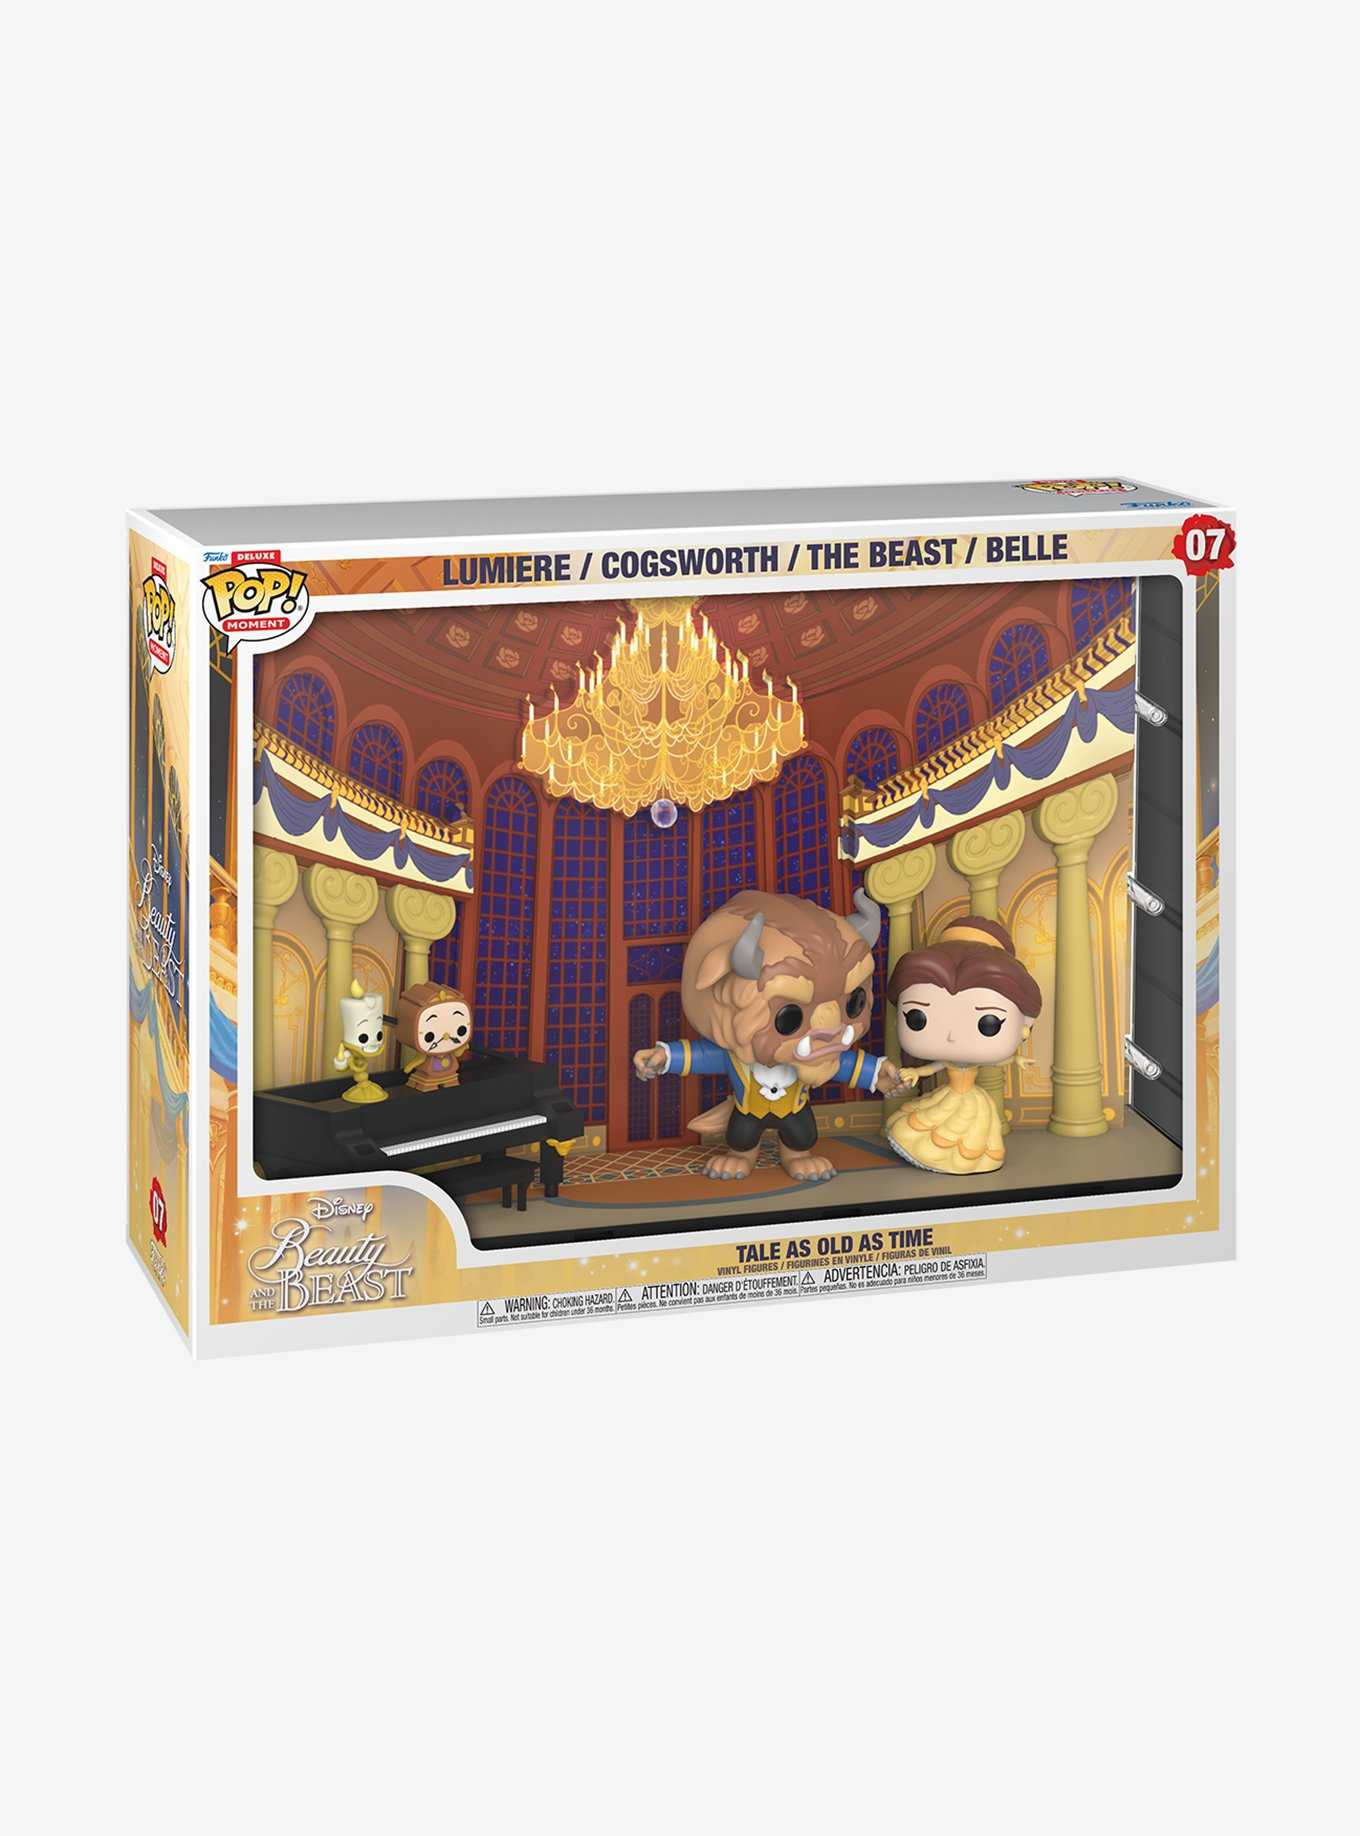 Funko Pop! Moment Disney Beauty and the Beast Tale as Old as Time Vinyl Figure, , hi-res